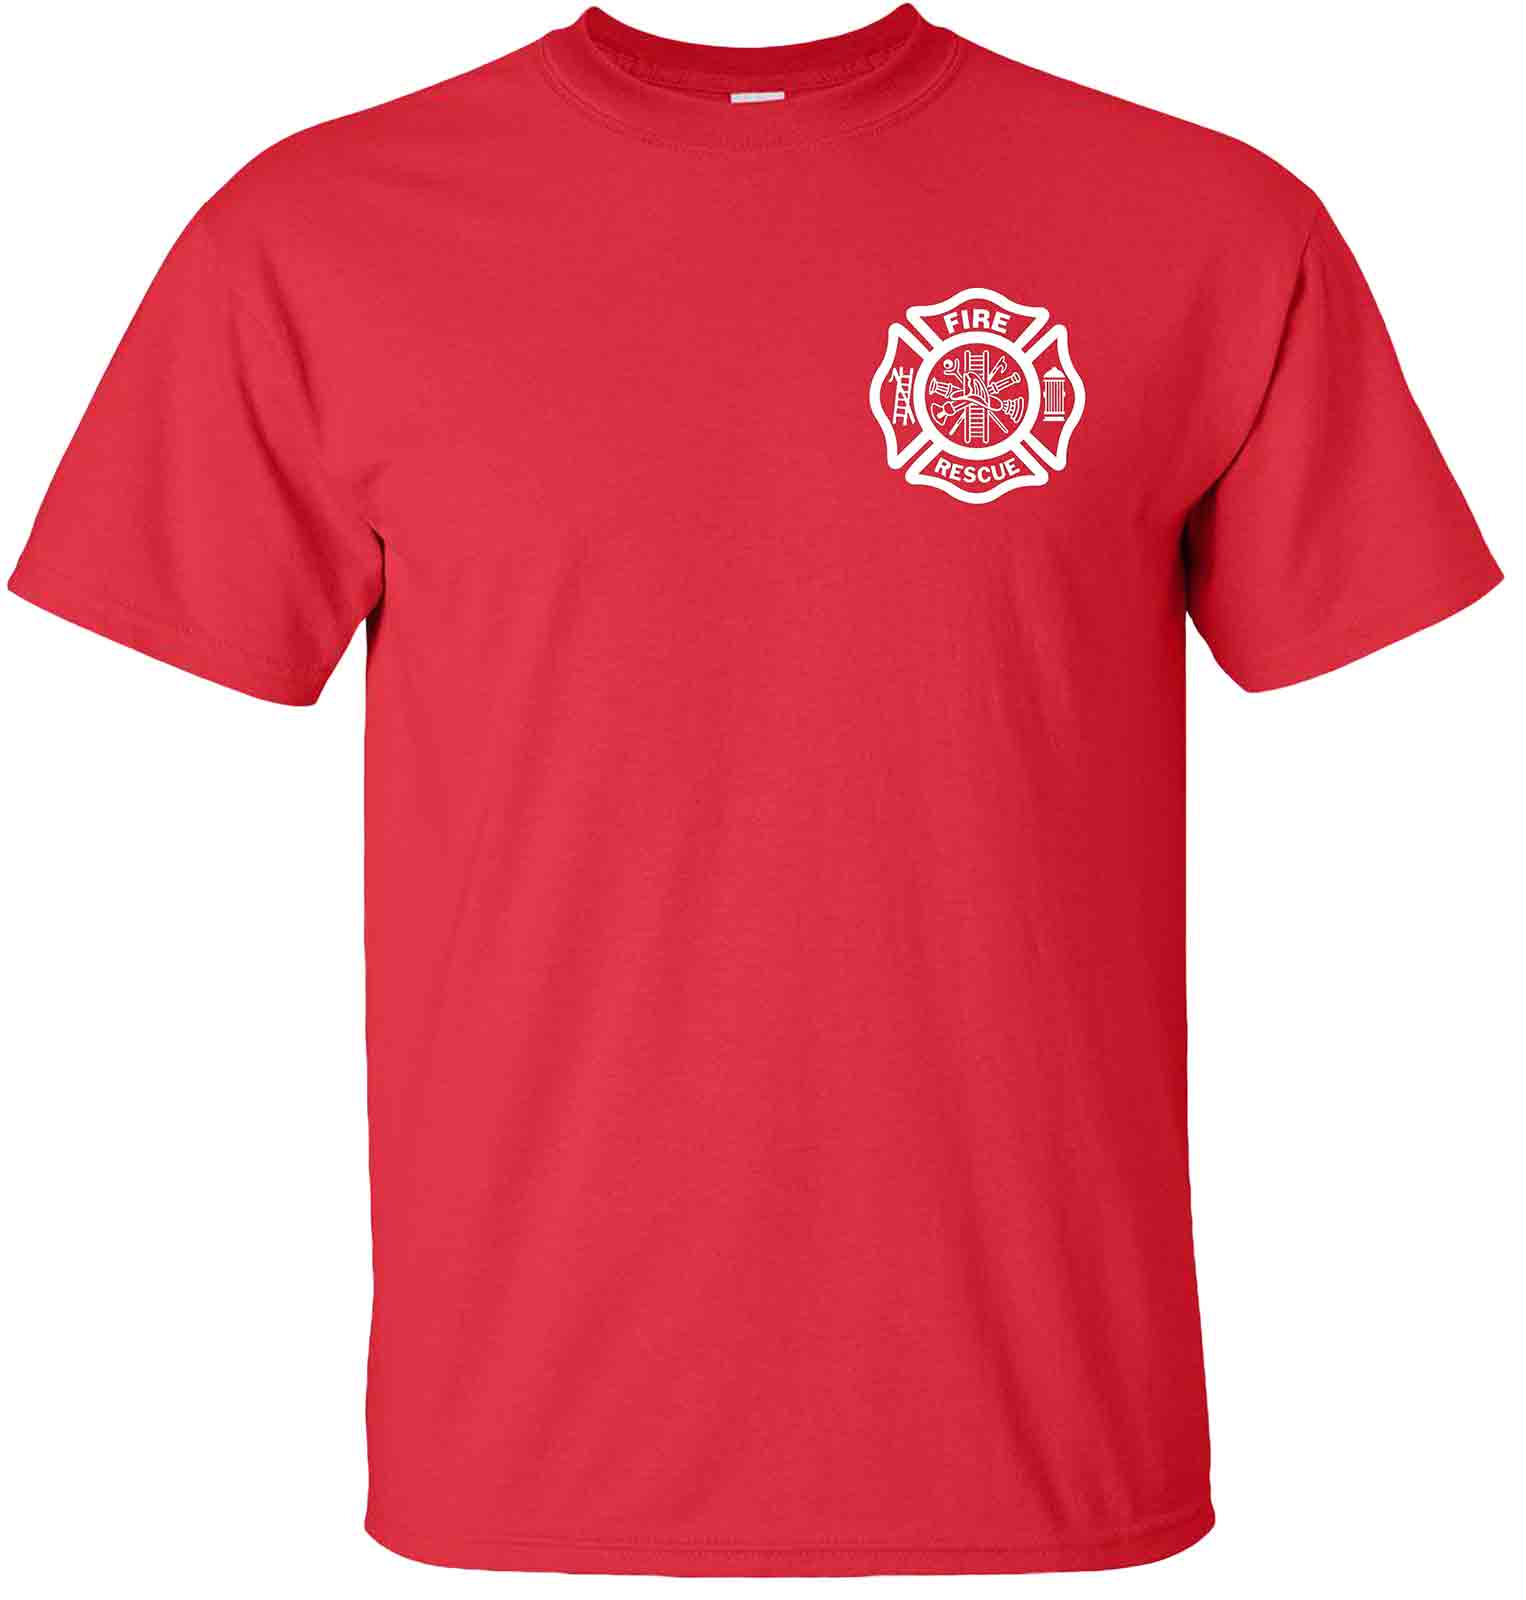 firefighter-fire-rescue-t-shirt-chest-print-red.jpg